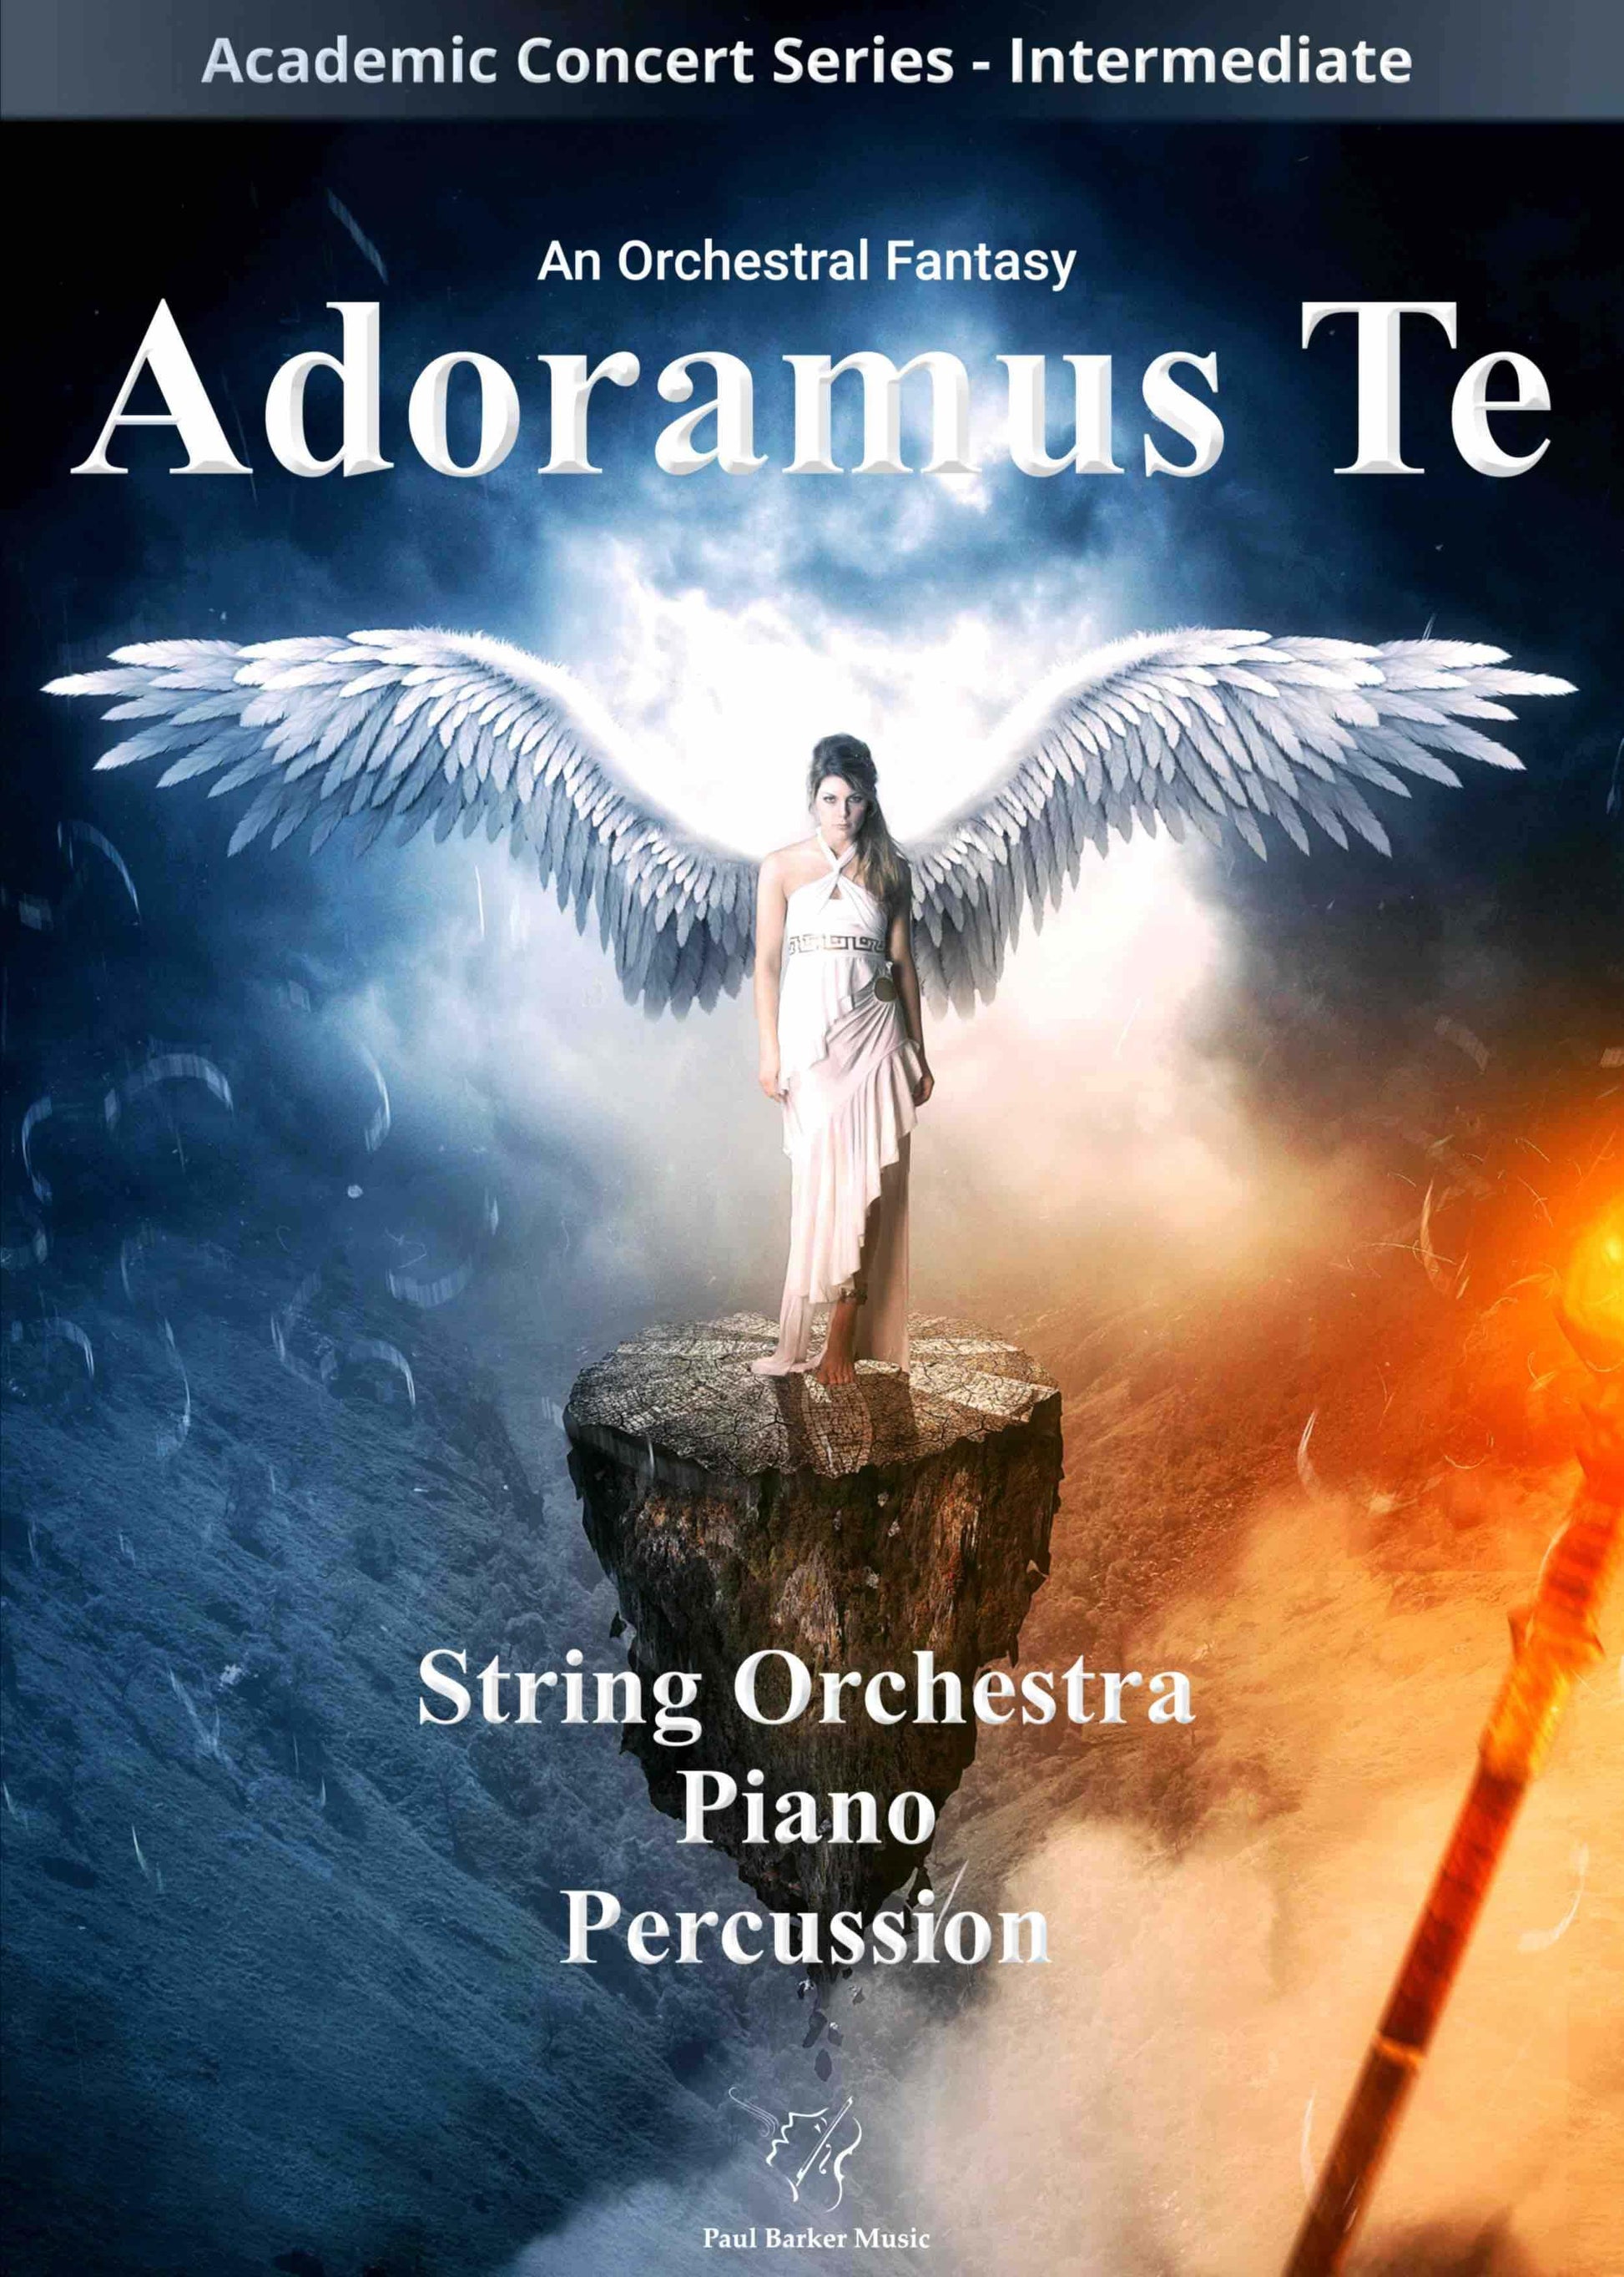 Adoramus Te (String Orchestra Special Edition) - Paul Barker Music 